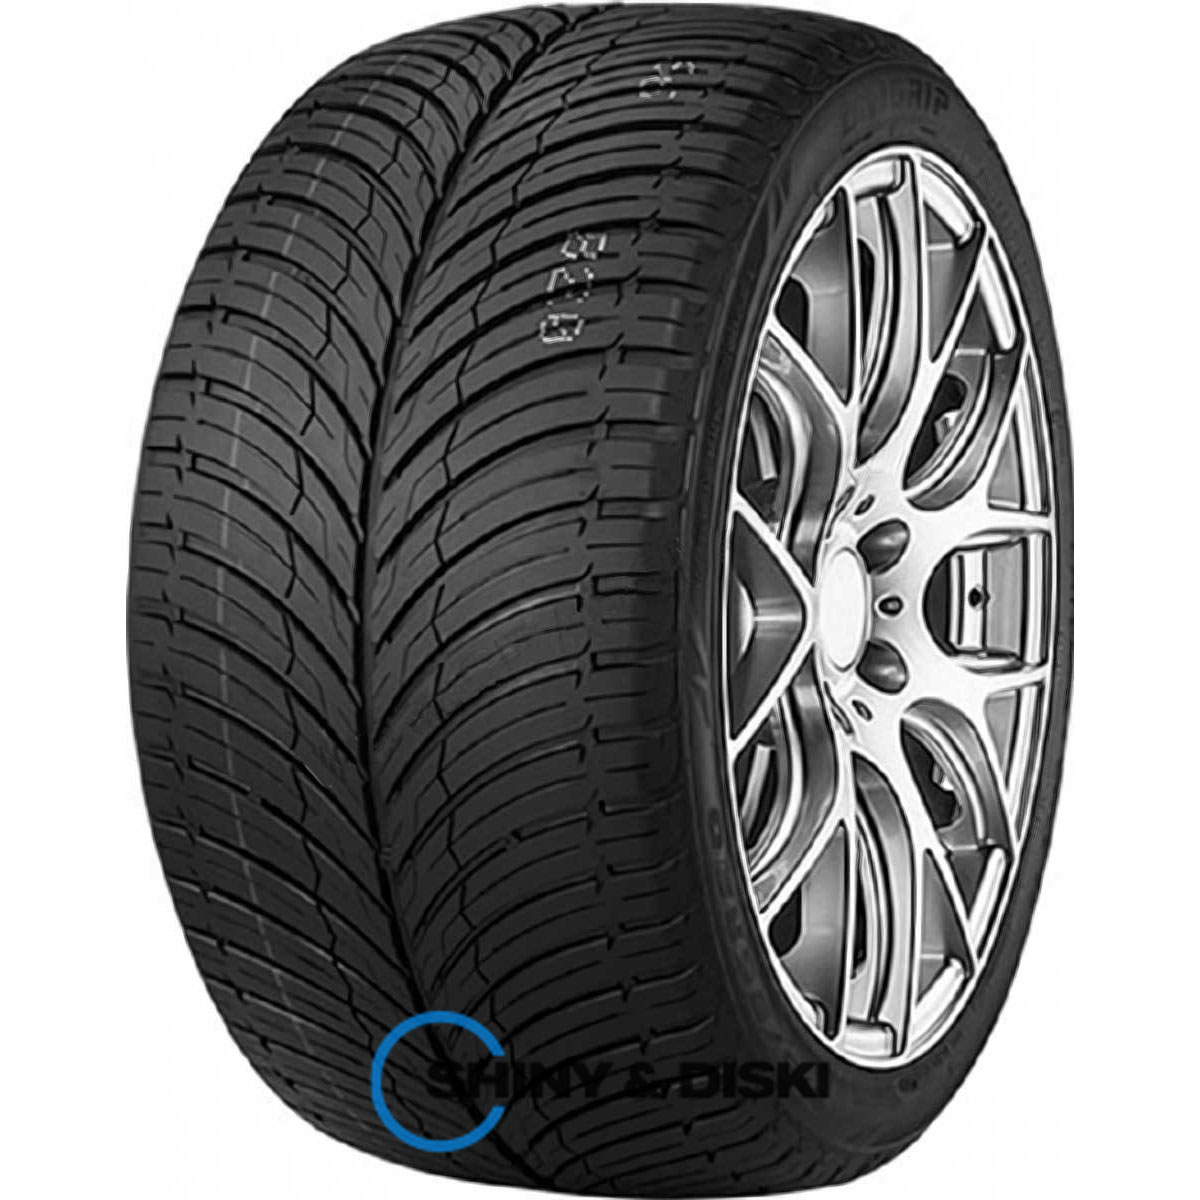 unigrip lateral force 4s 225/45 r19 96w xl